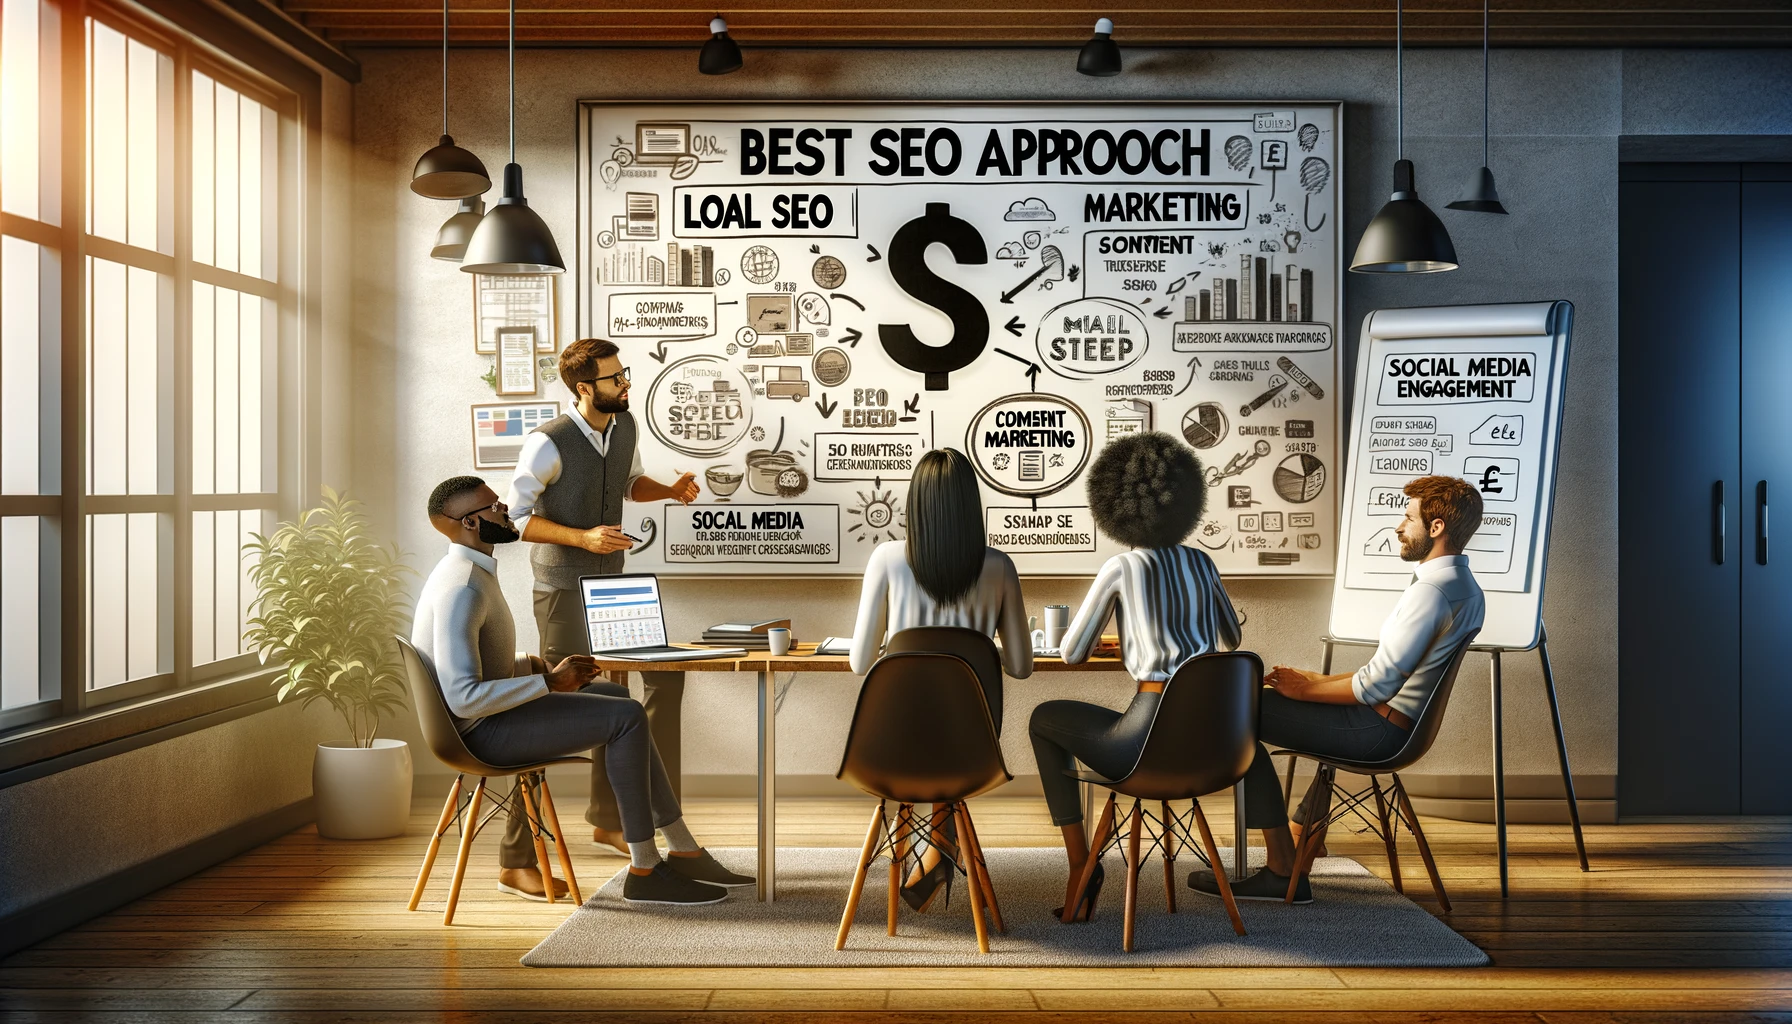 what is the best seo approach for a small business